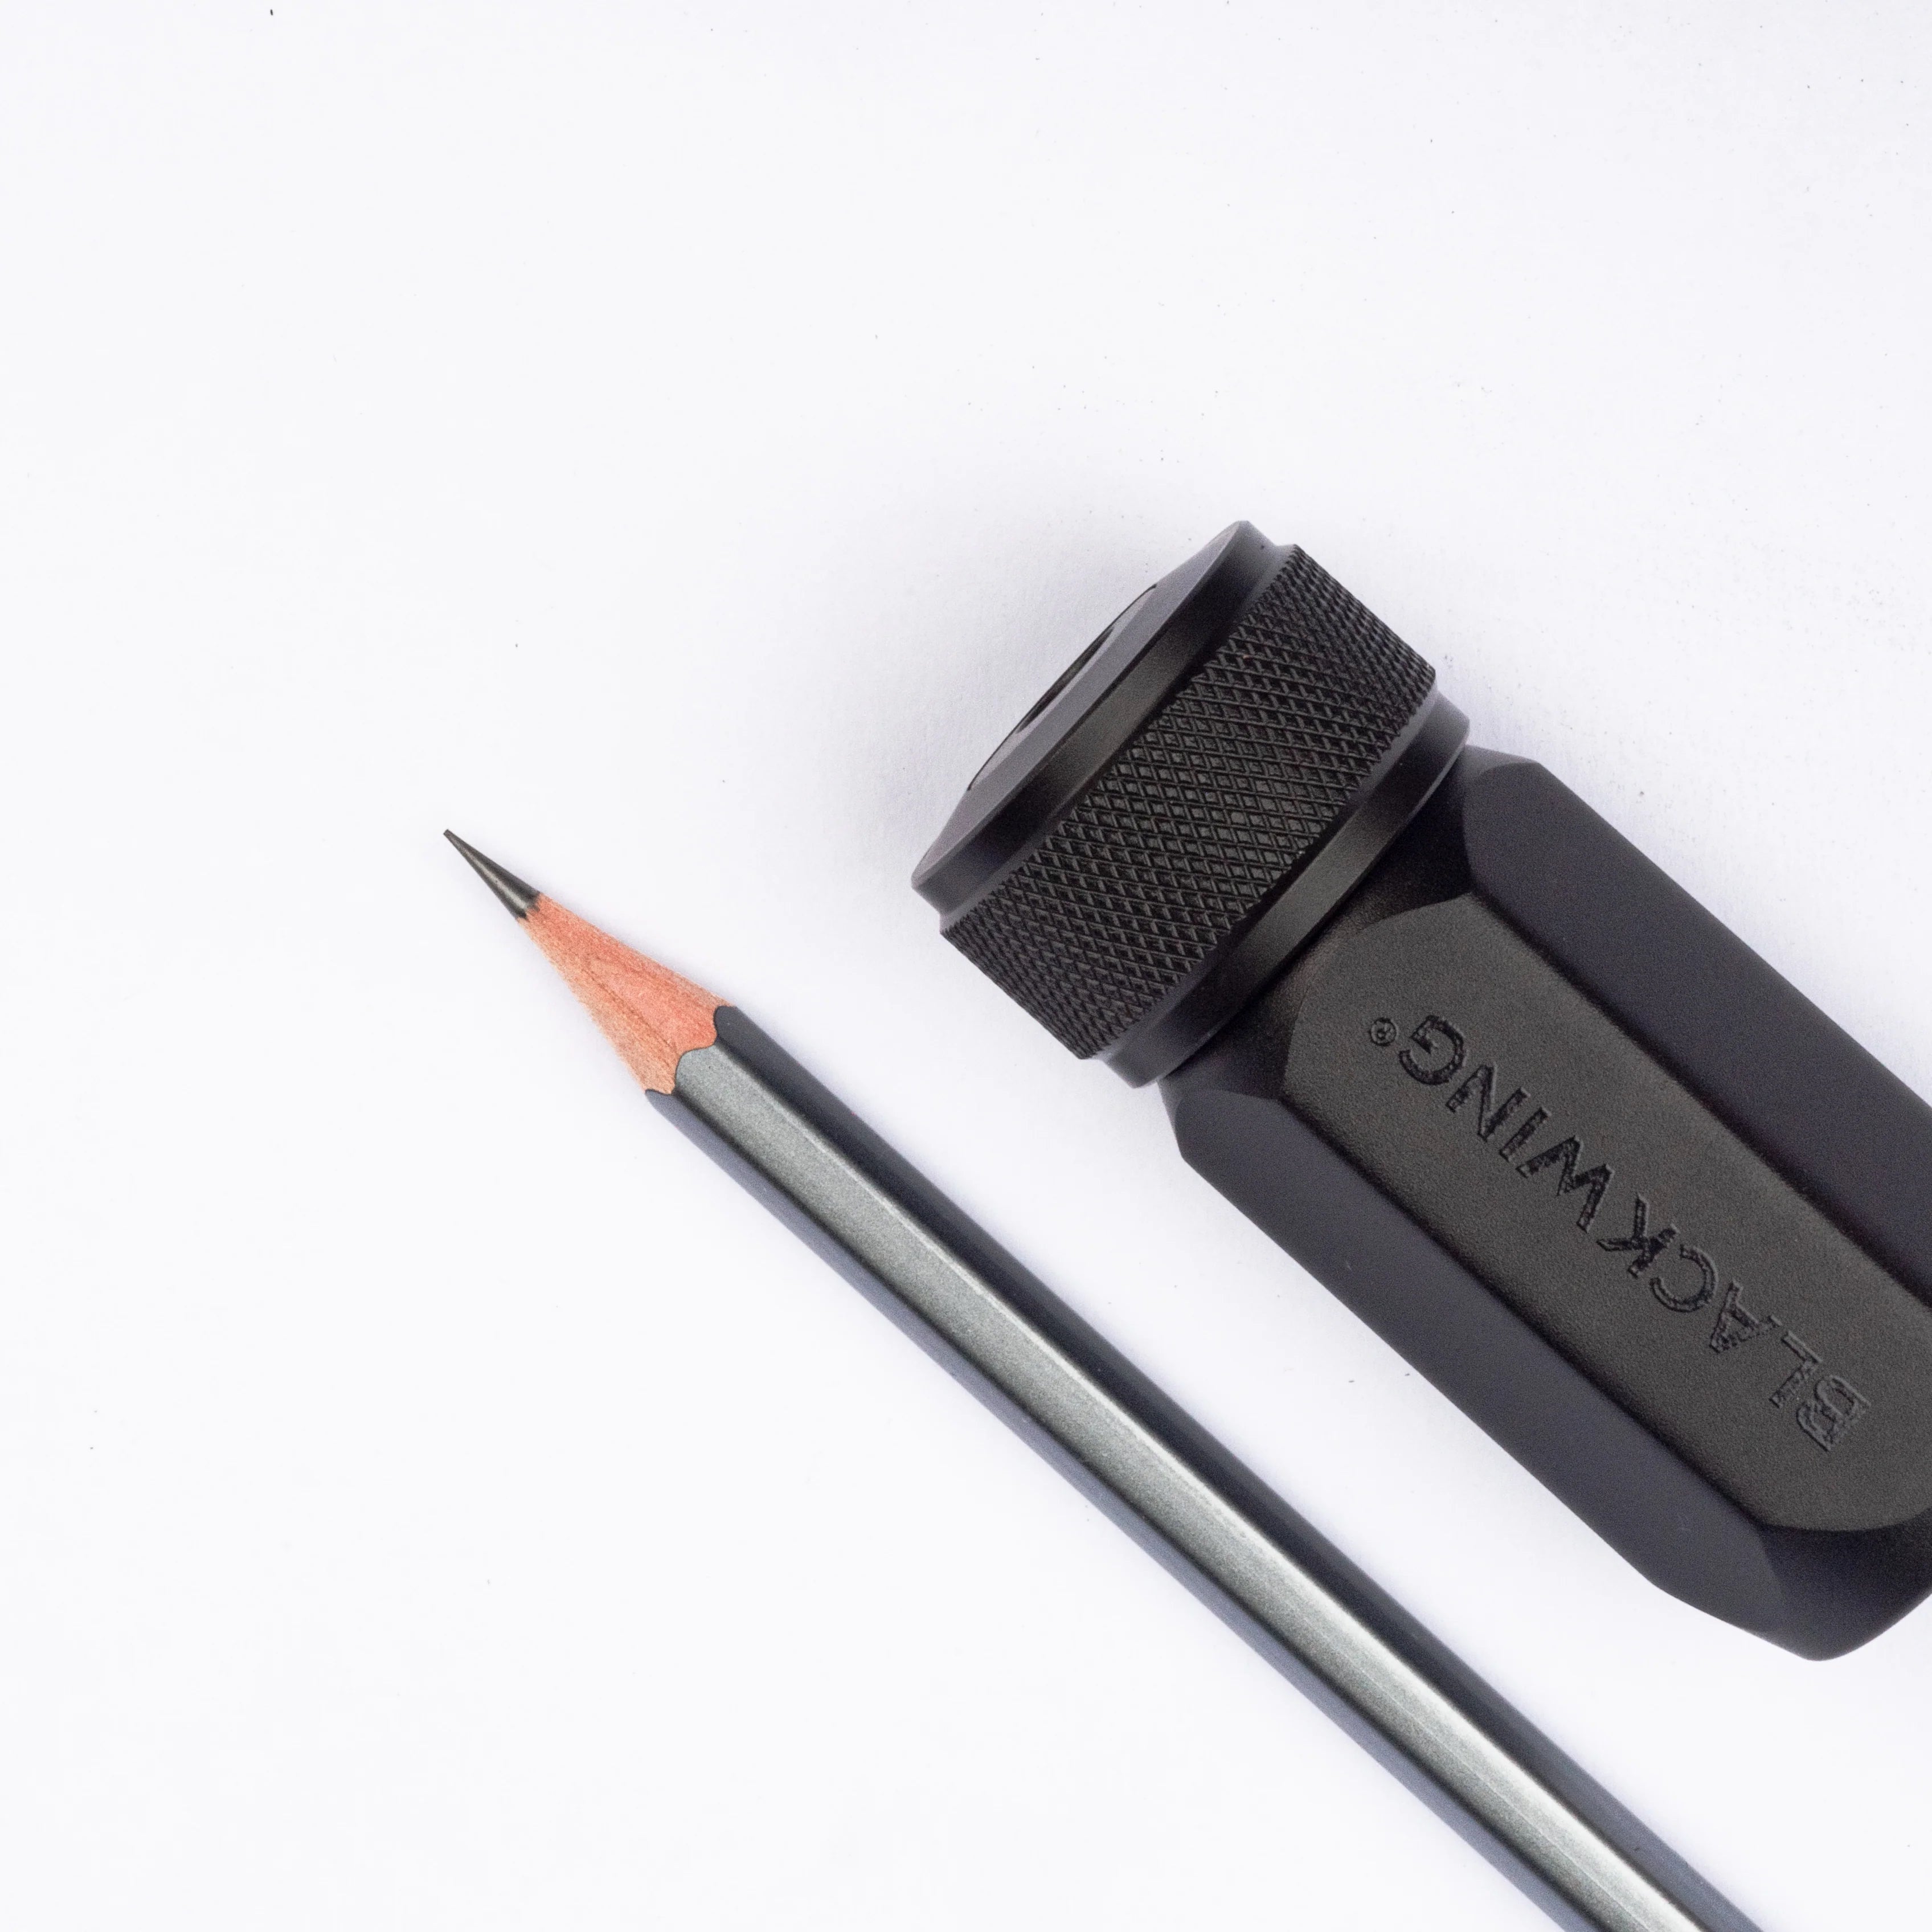 One Step Pencil Sharpener by Blackwing in 3 Colors